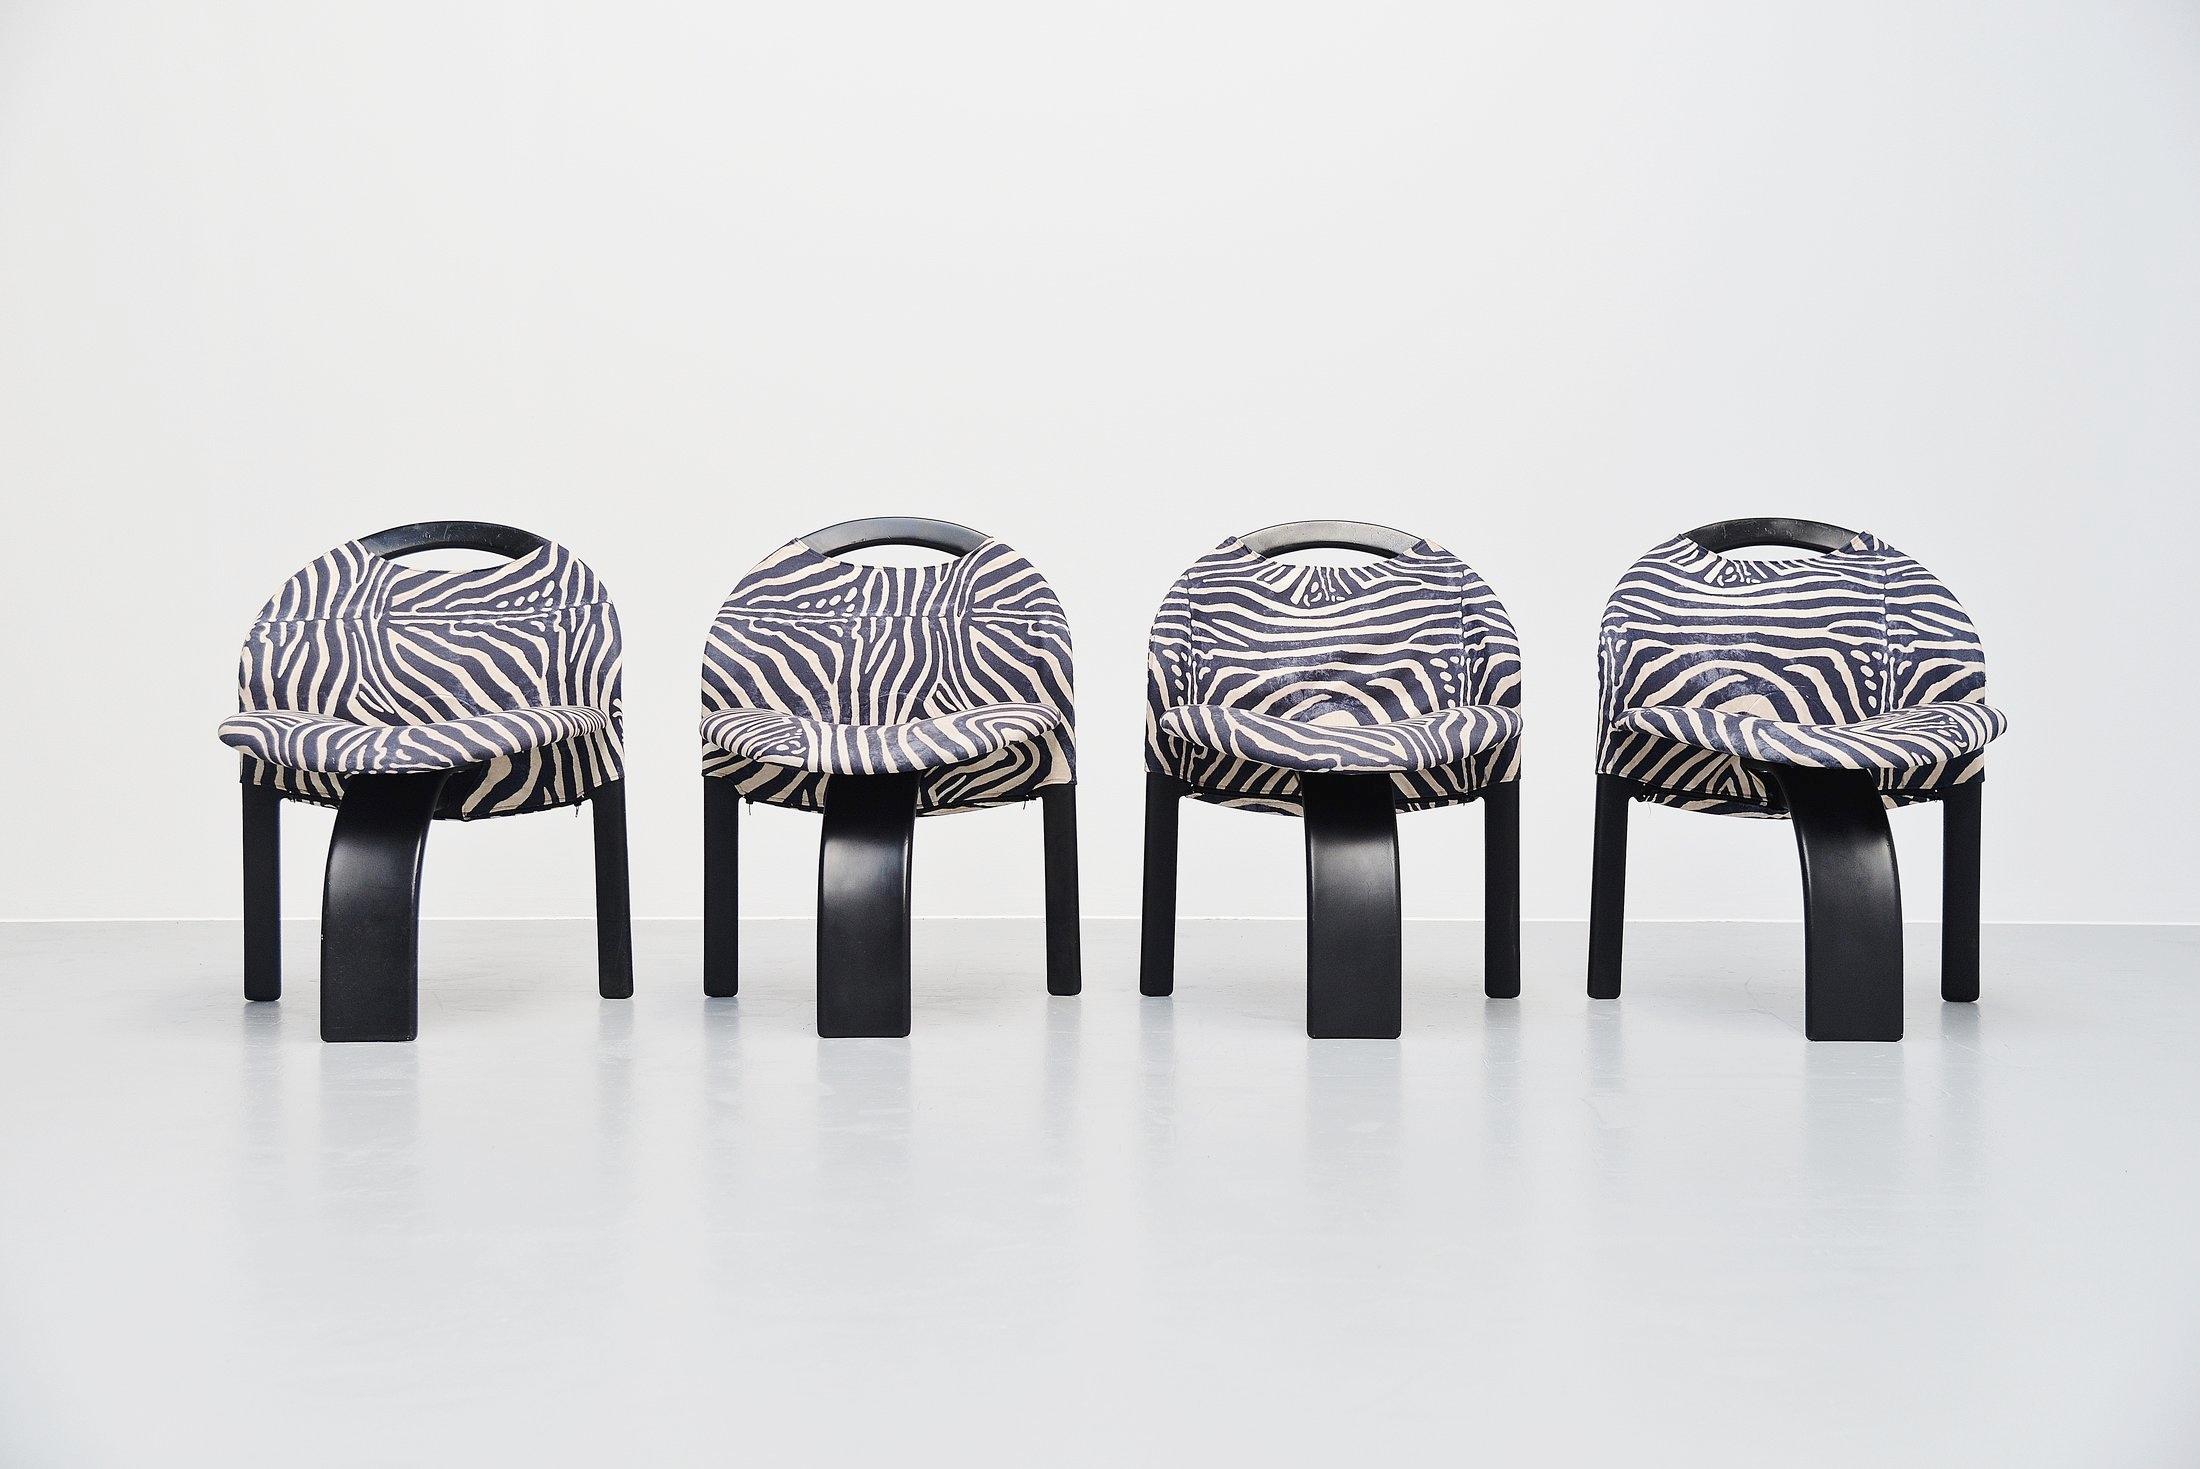 Very nice set of 'Sail' chairs designed by Giovanni Offredi and manufactured by Saporiti, Italy 1973. The chairs are made of black plastic and these 4 chairs have a nice and unusual zebra print fabric. These extraordinary chairs seat very